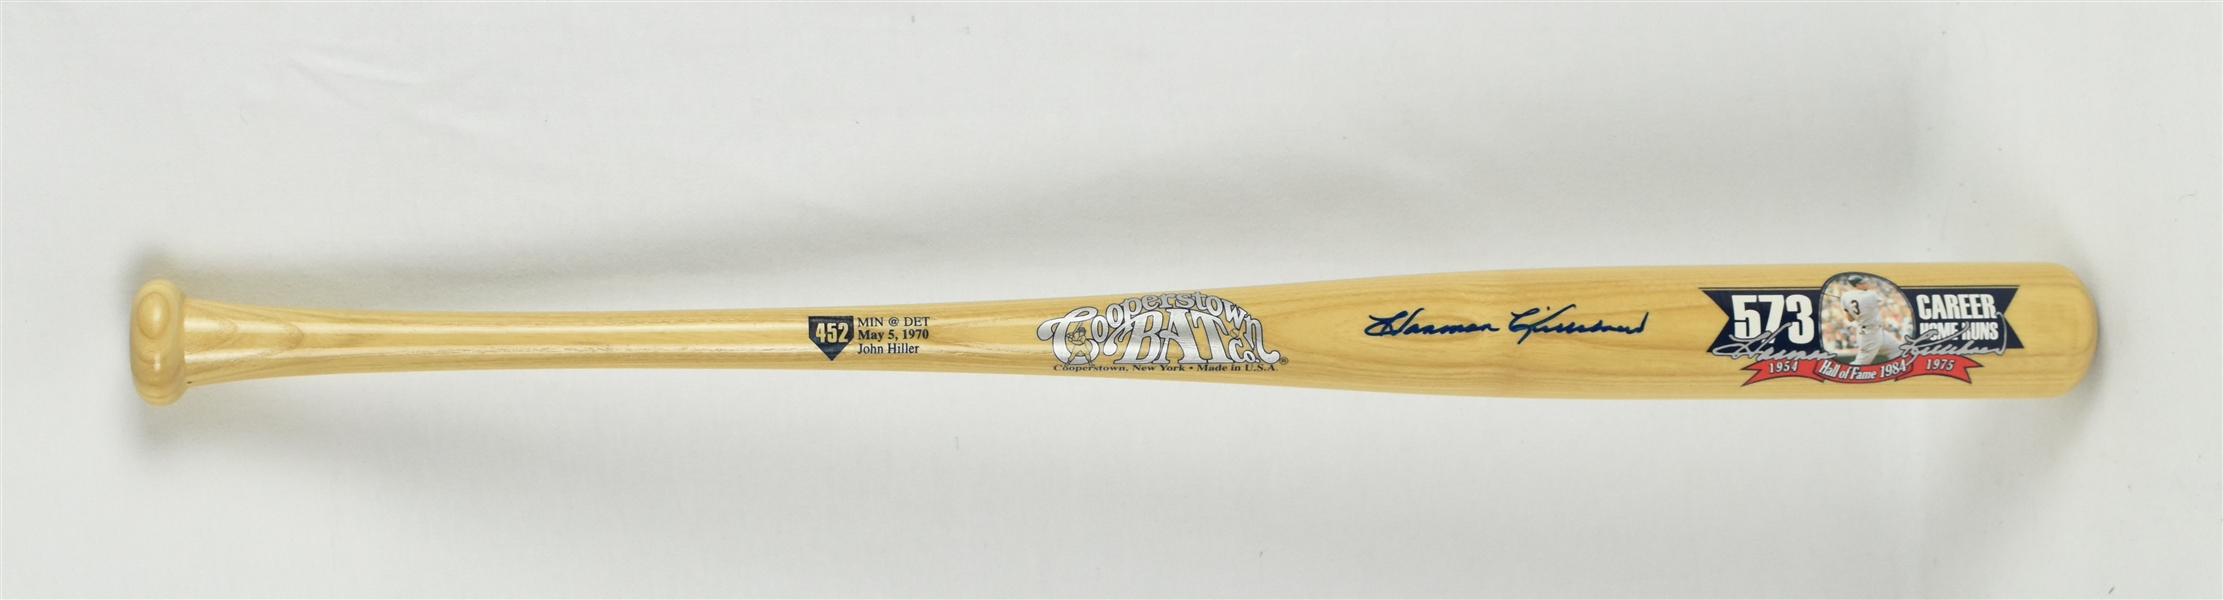 Harmon Killebrew Autographed Limited Edition Cooperstown Collection HR #452  Bat